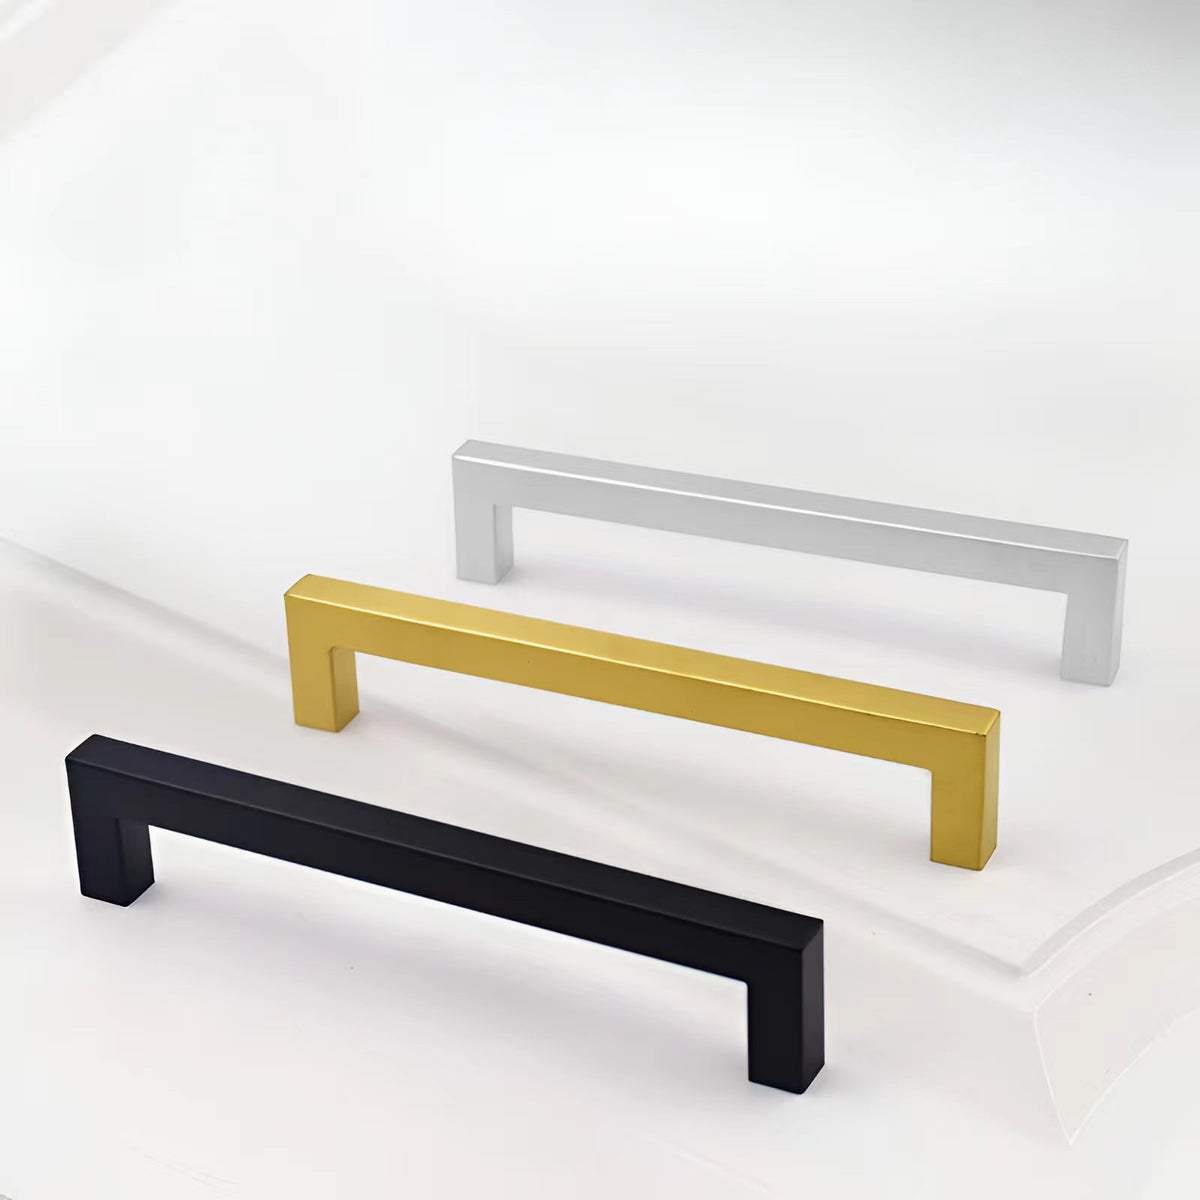 1Pack Solid Brushed Satin Square Bar Pull Handles